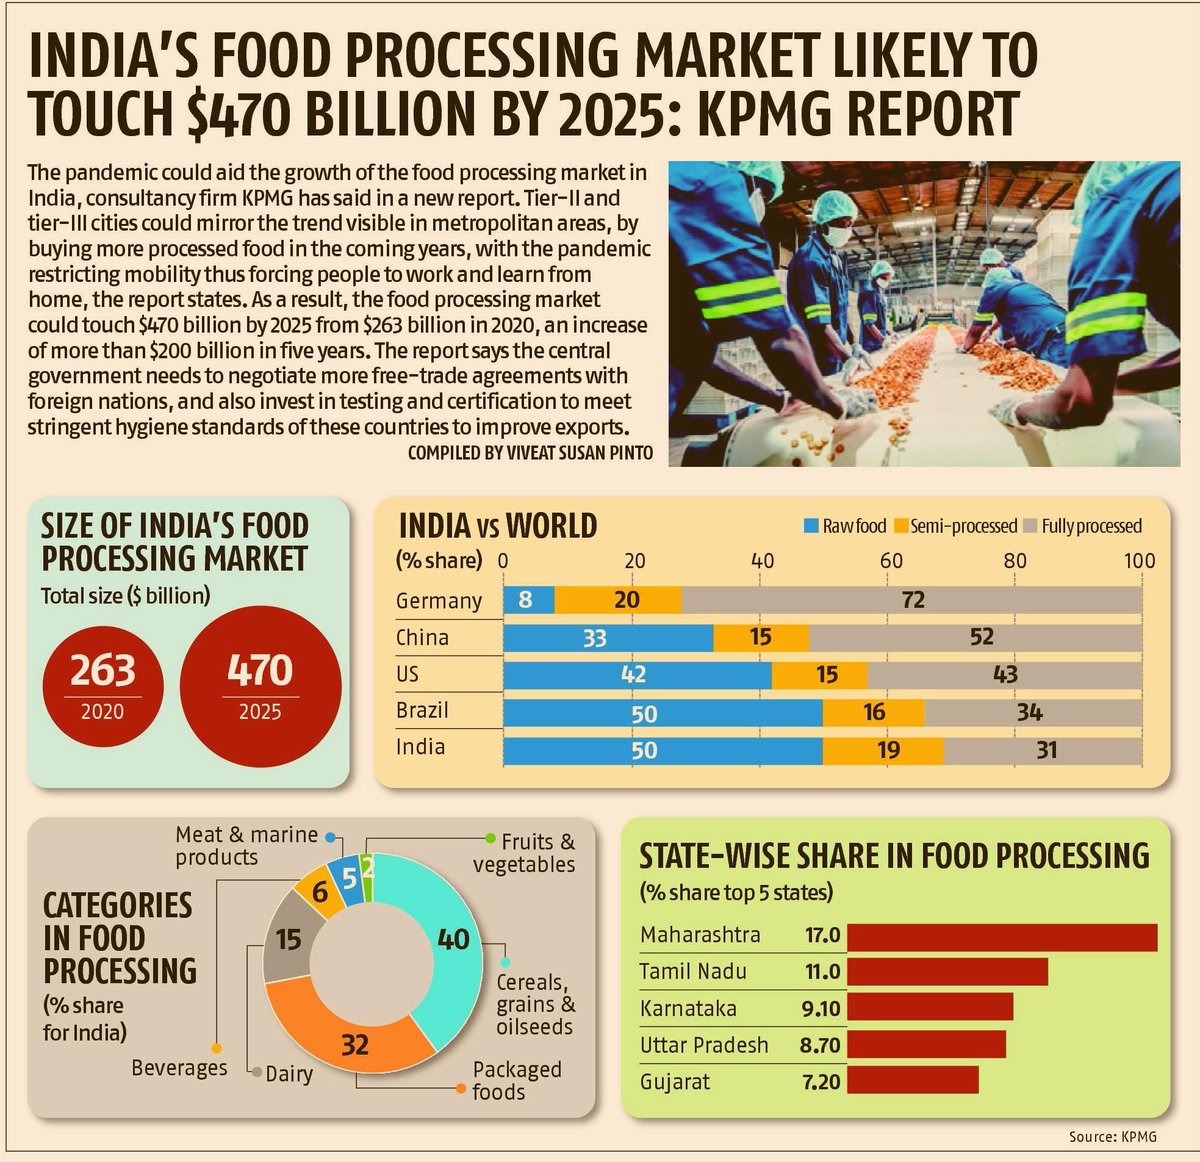 INDIA’S FOOD PROCESSING MARKET LIKELY TO
TOUCH $470 BILLION BY 2025: KPMG REPORT
#India #Food #Processing #KPMG #analysis #reports #stats #PLI #scheme #India #world #beverages #meat #marineproducts #fruits #vegetables #cereals #grains #oilseeds #dairy #markets Viveat Susan Pinto